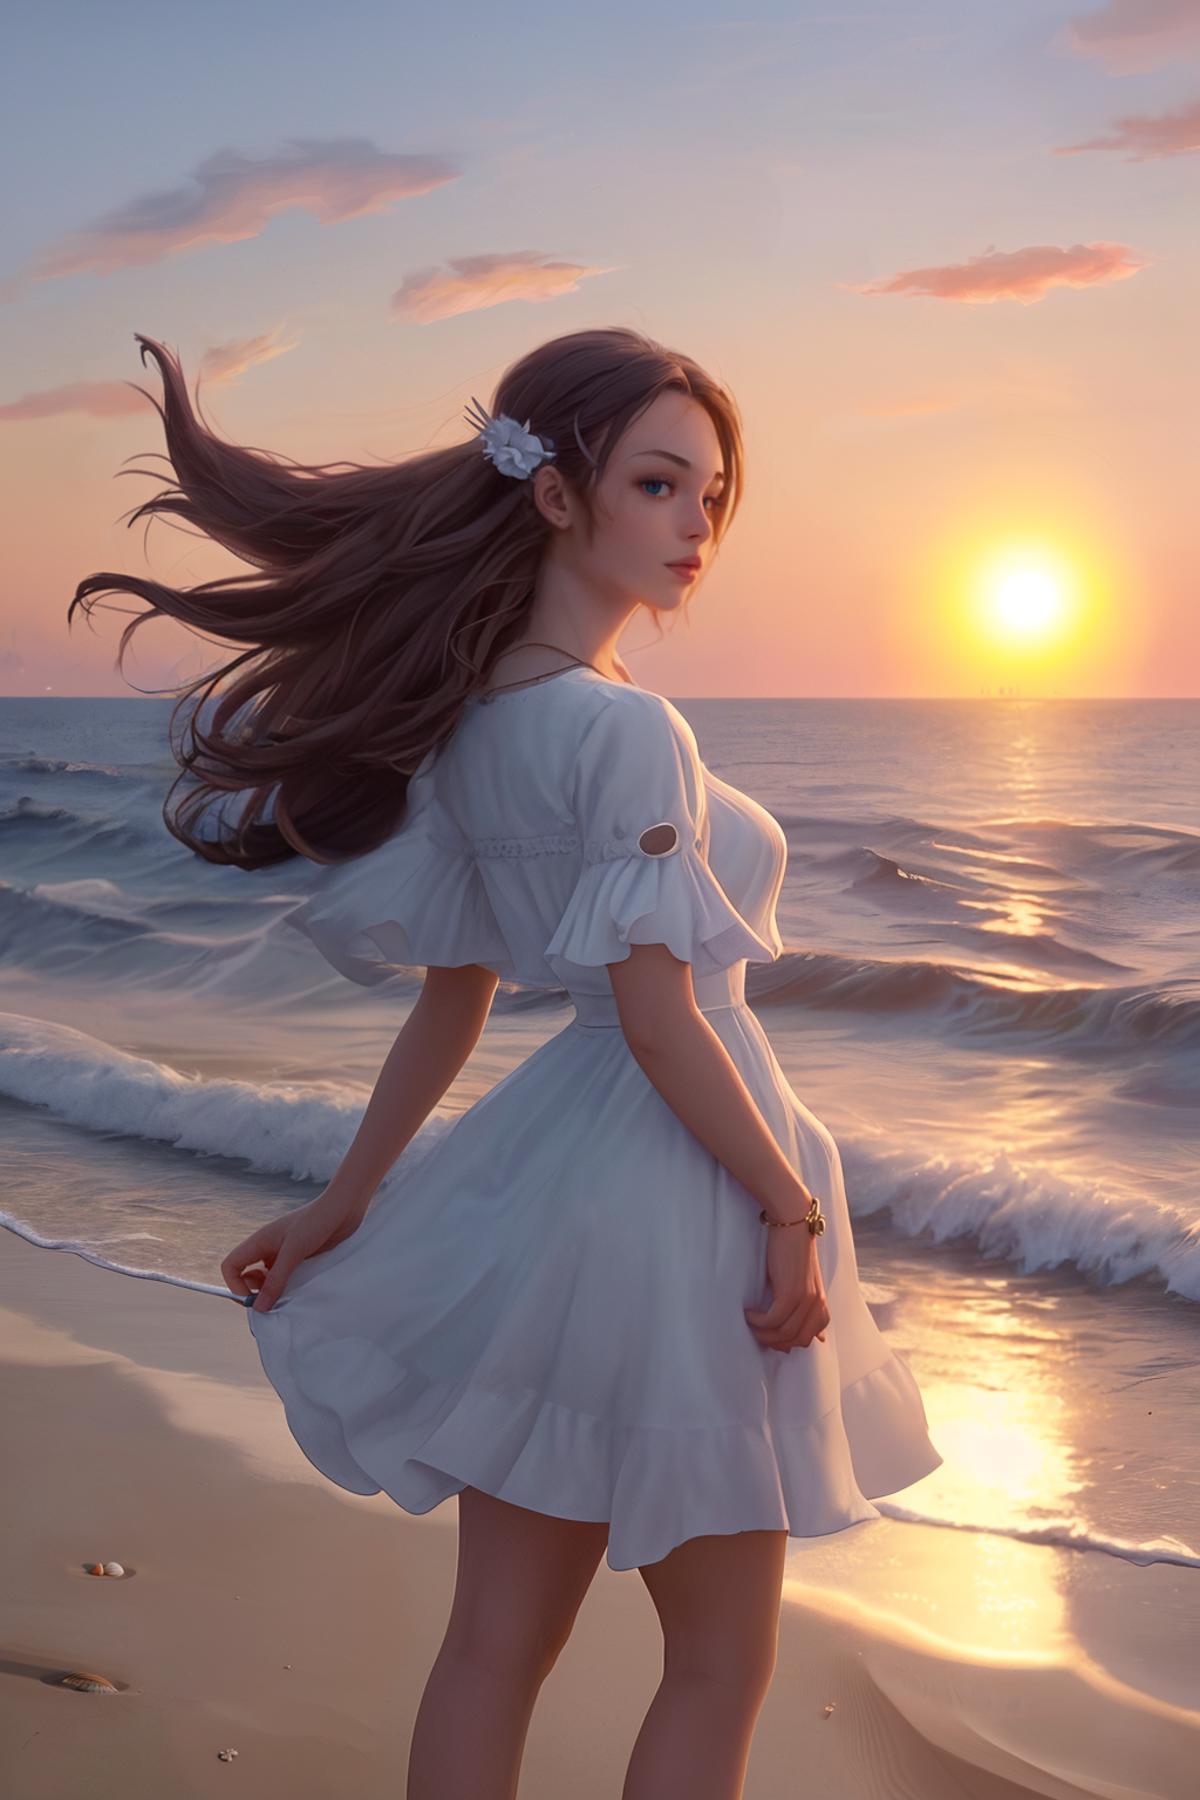 Artwork of a woman in a white dress standing on a beach with the ocean in the background.